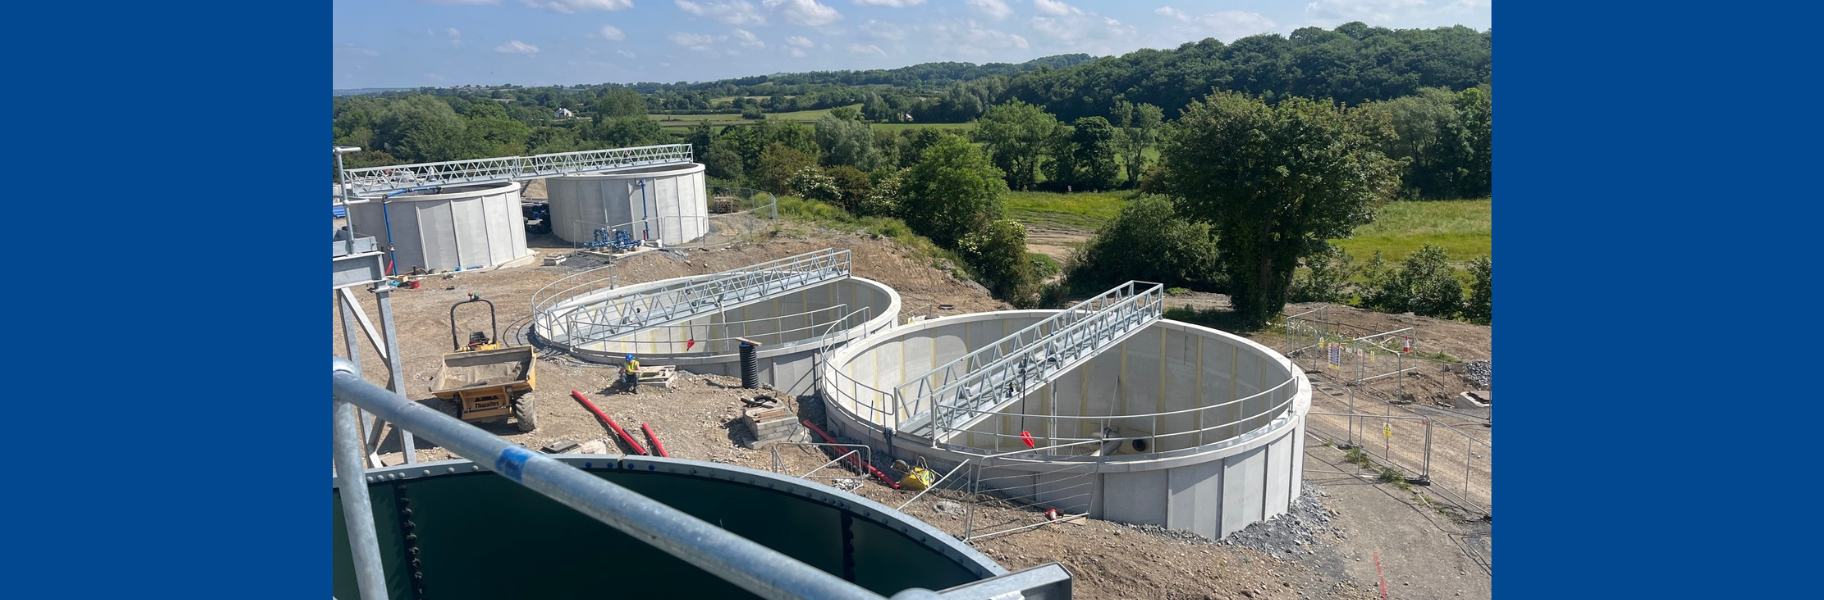 View of a drinking water treatment plant being constructed